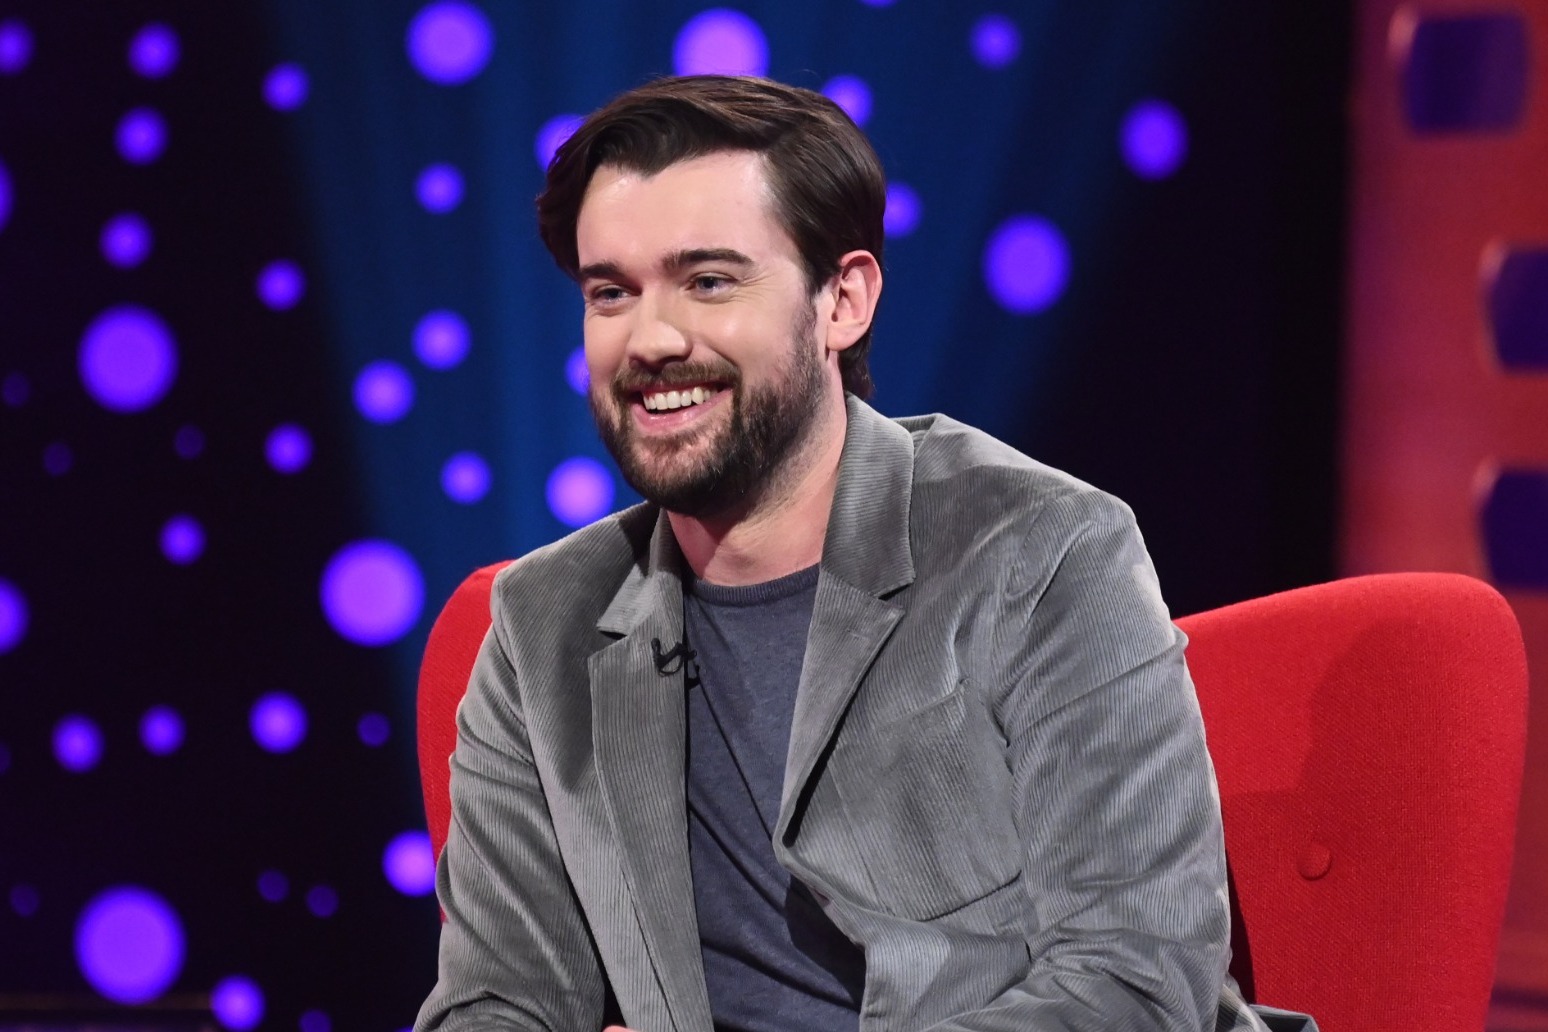 Comedians ‘checking themselves’ after Will Smith slap, says Jack Whitehall 